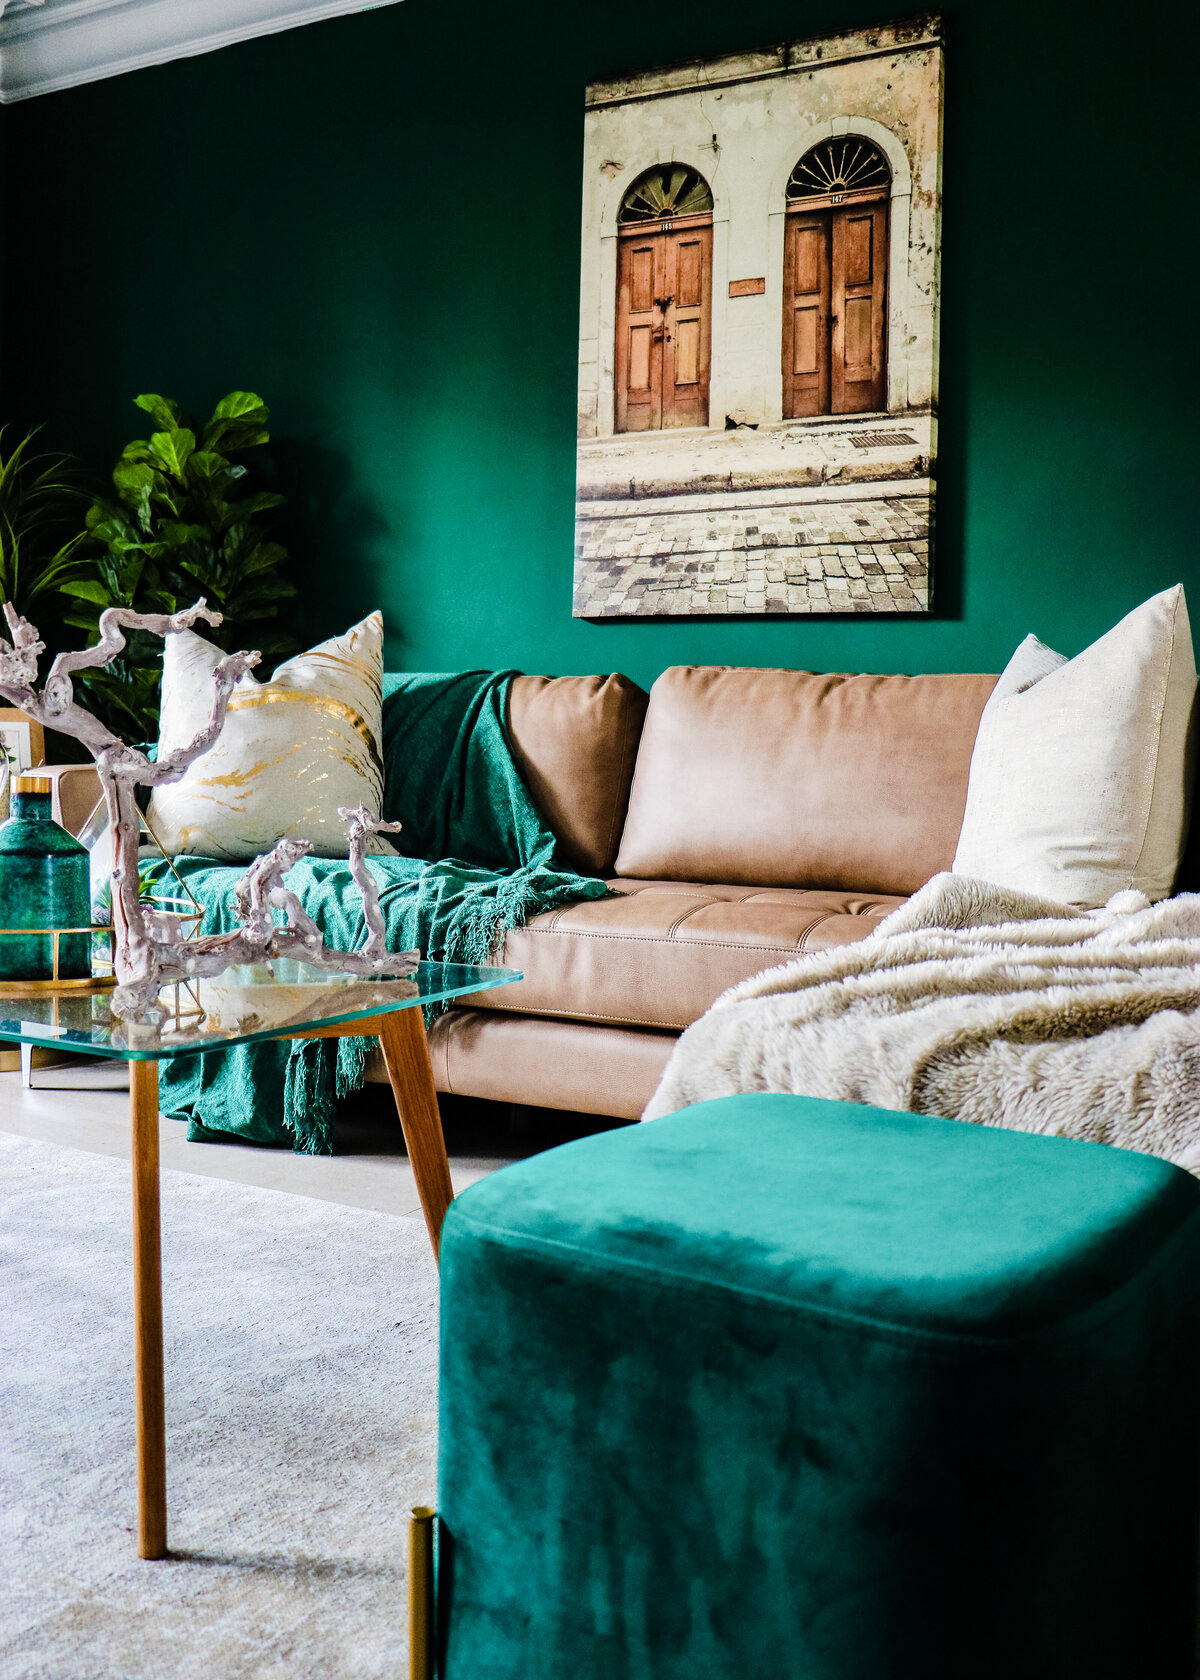 Dark green painted walls create a boho loung with a tan leather sofa and a beige throw.